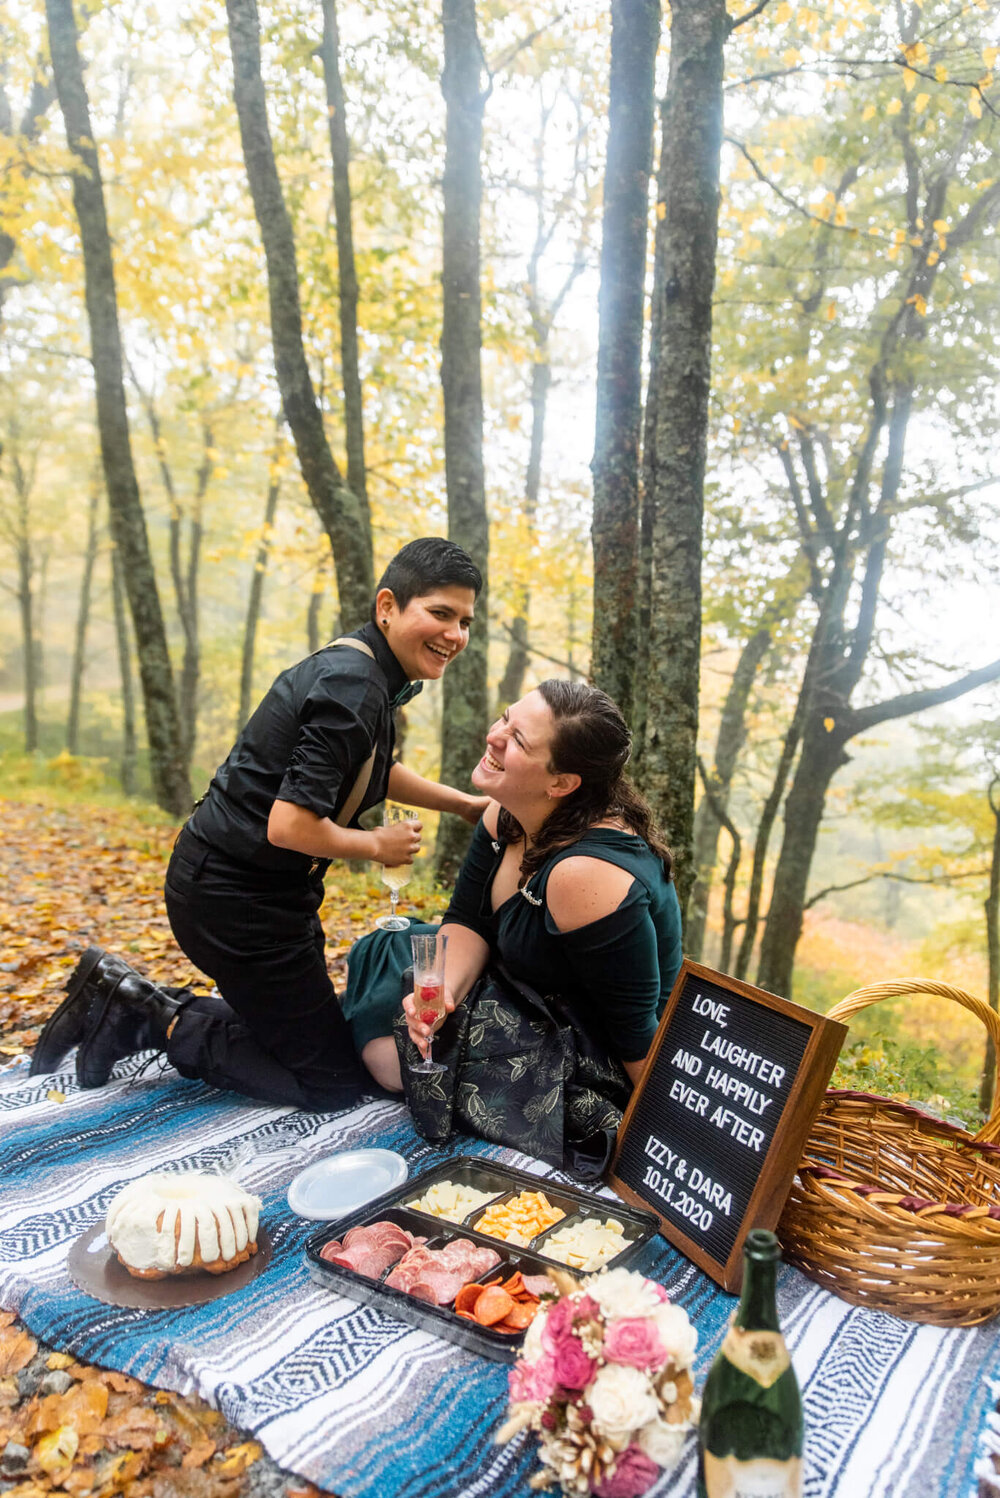 Wedding couple laughing during their elopement picnic in the forests of asheville, nc